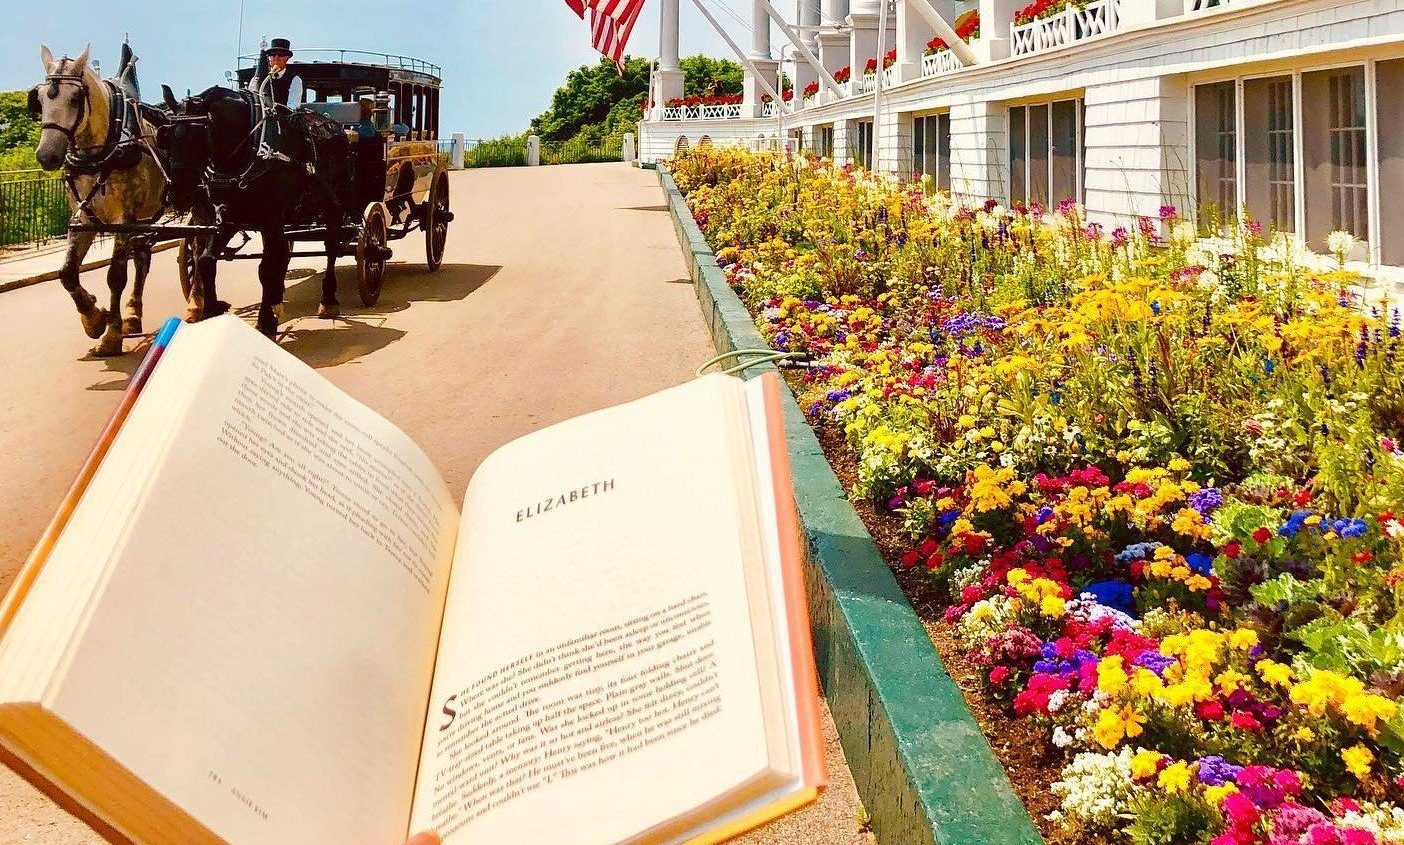 Mackinac Island is full of unique places such as Grand Hotel where you can escape with a book and let your imagination run free.